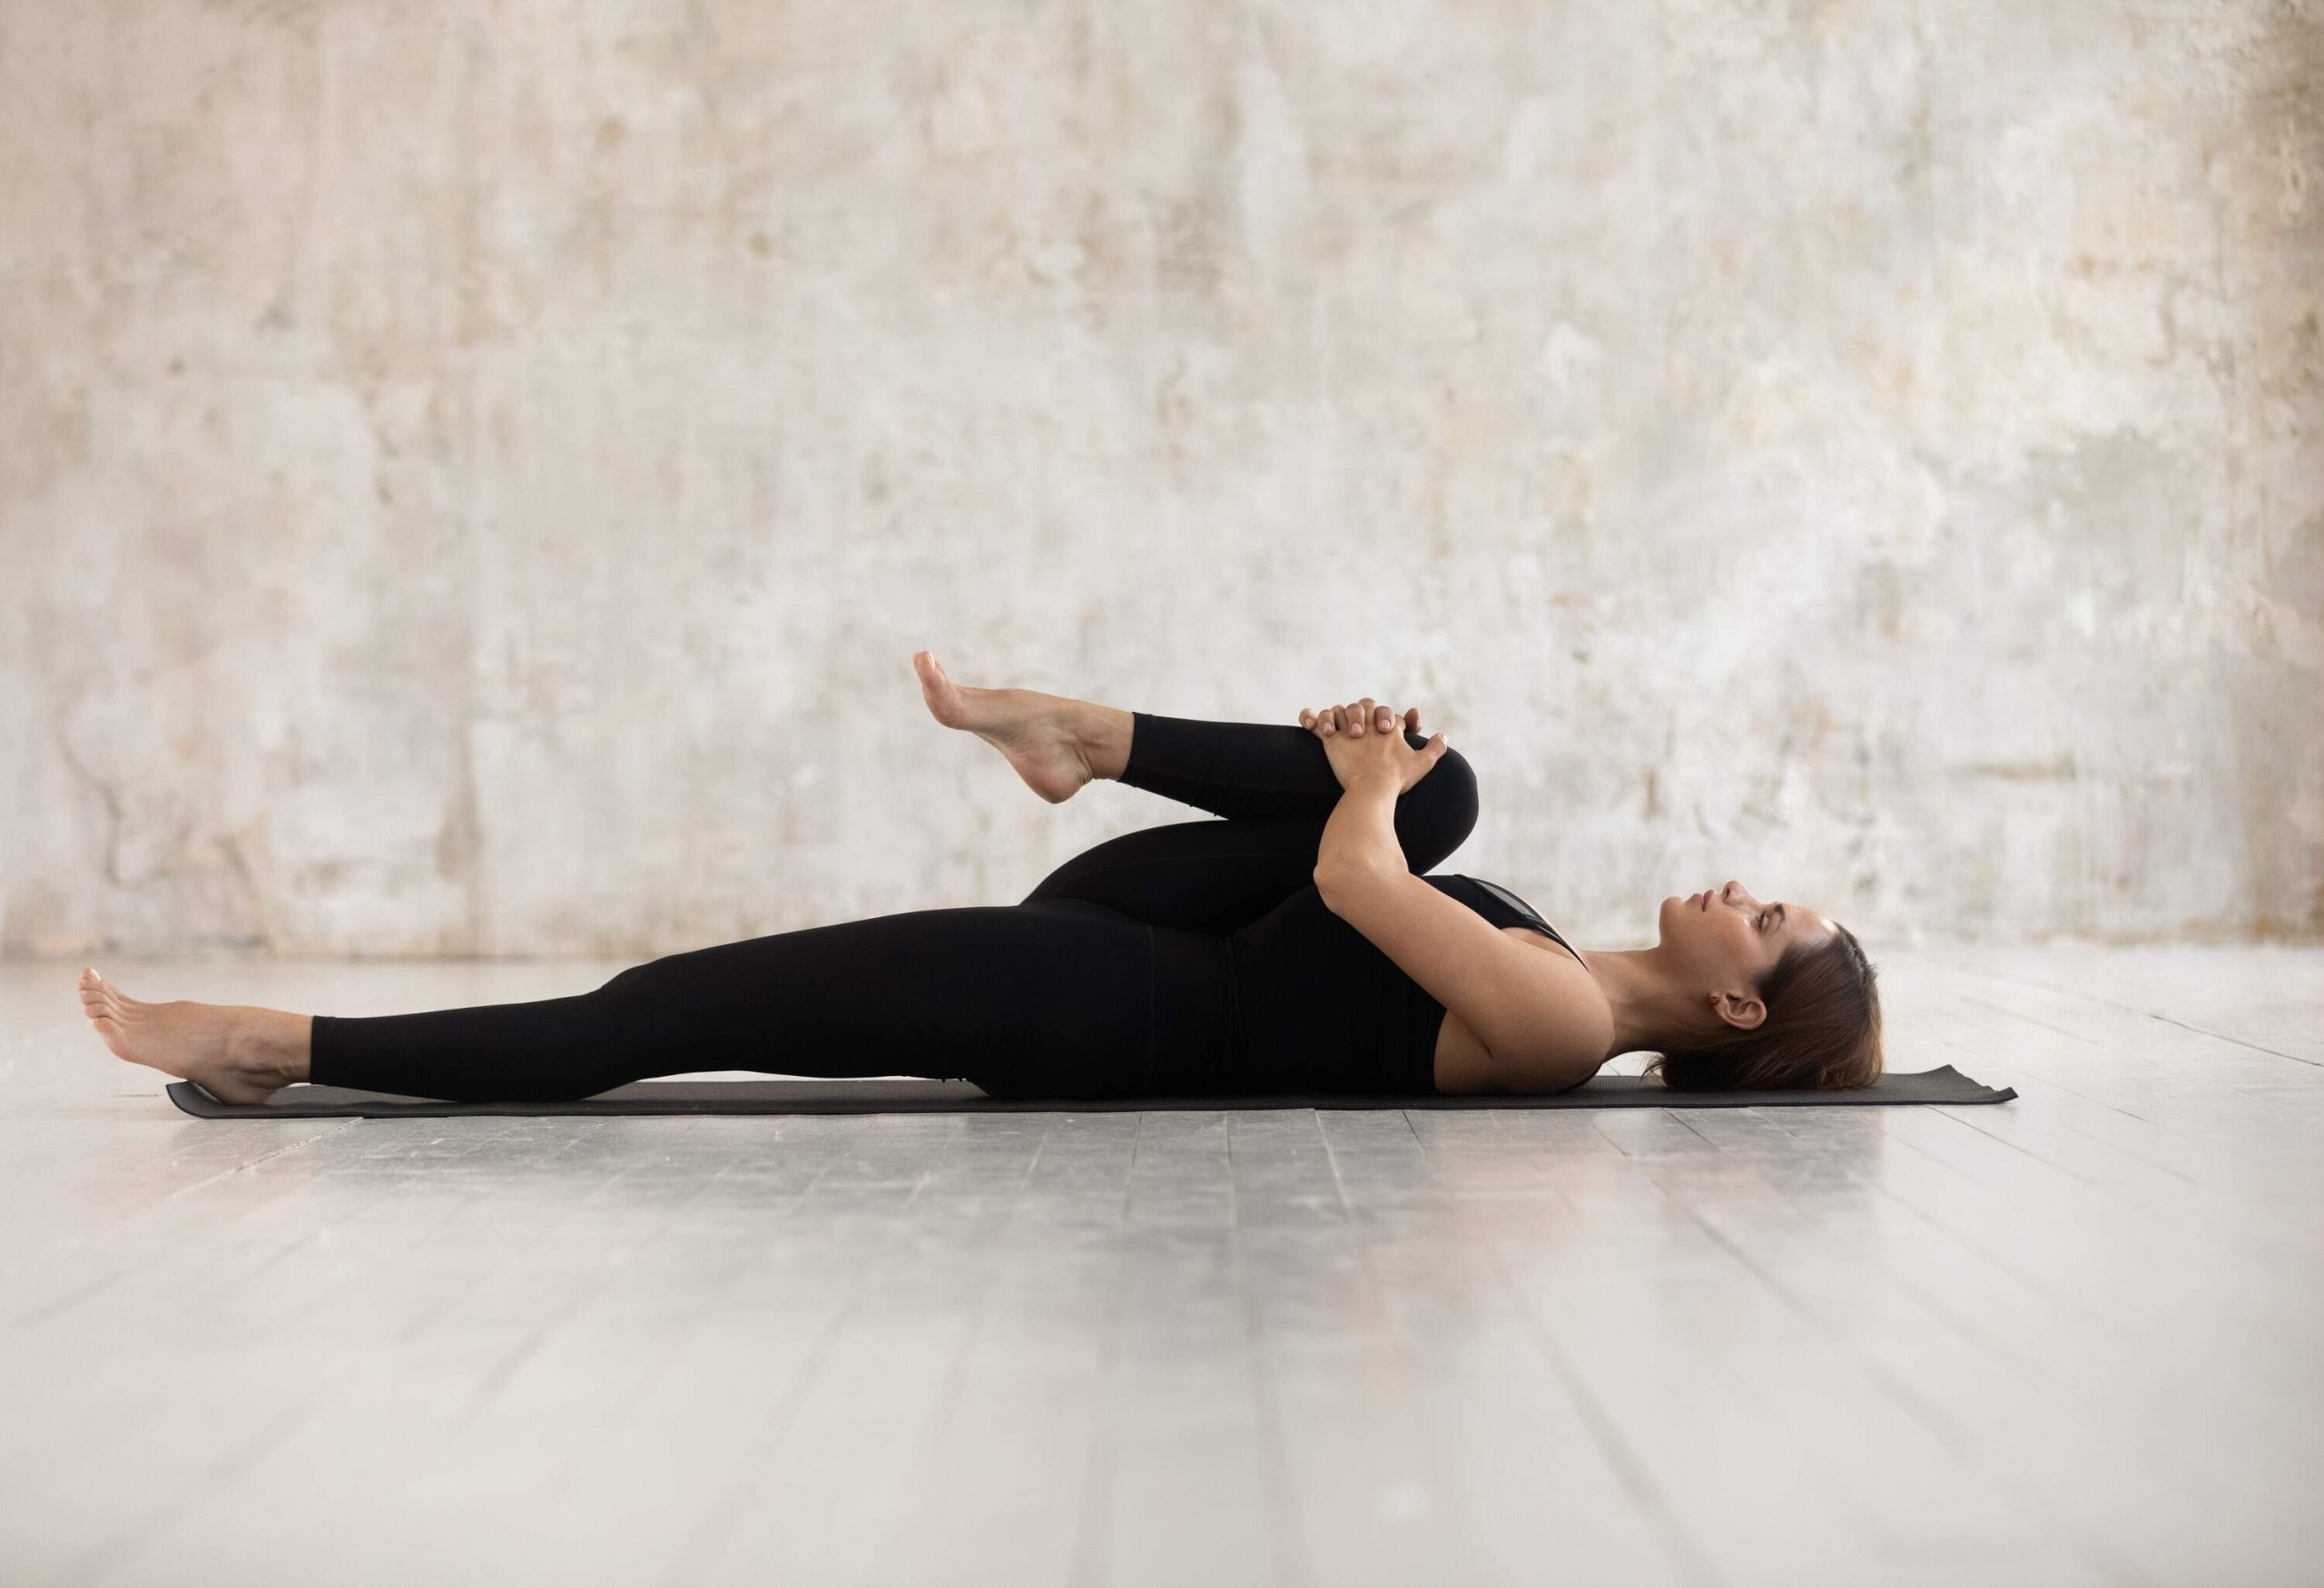 A woman dressed in all-black exercise attire lying on the floor with one knee pressed against her chest.